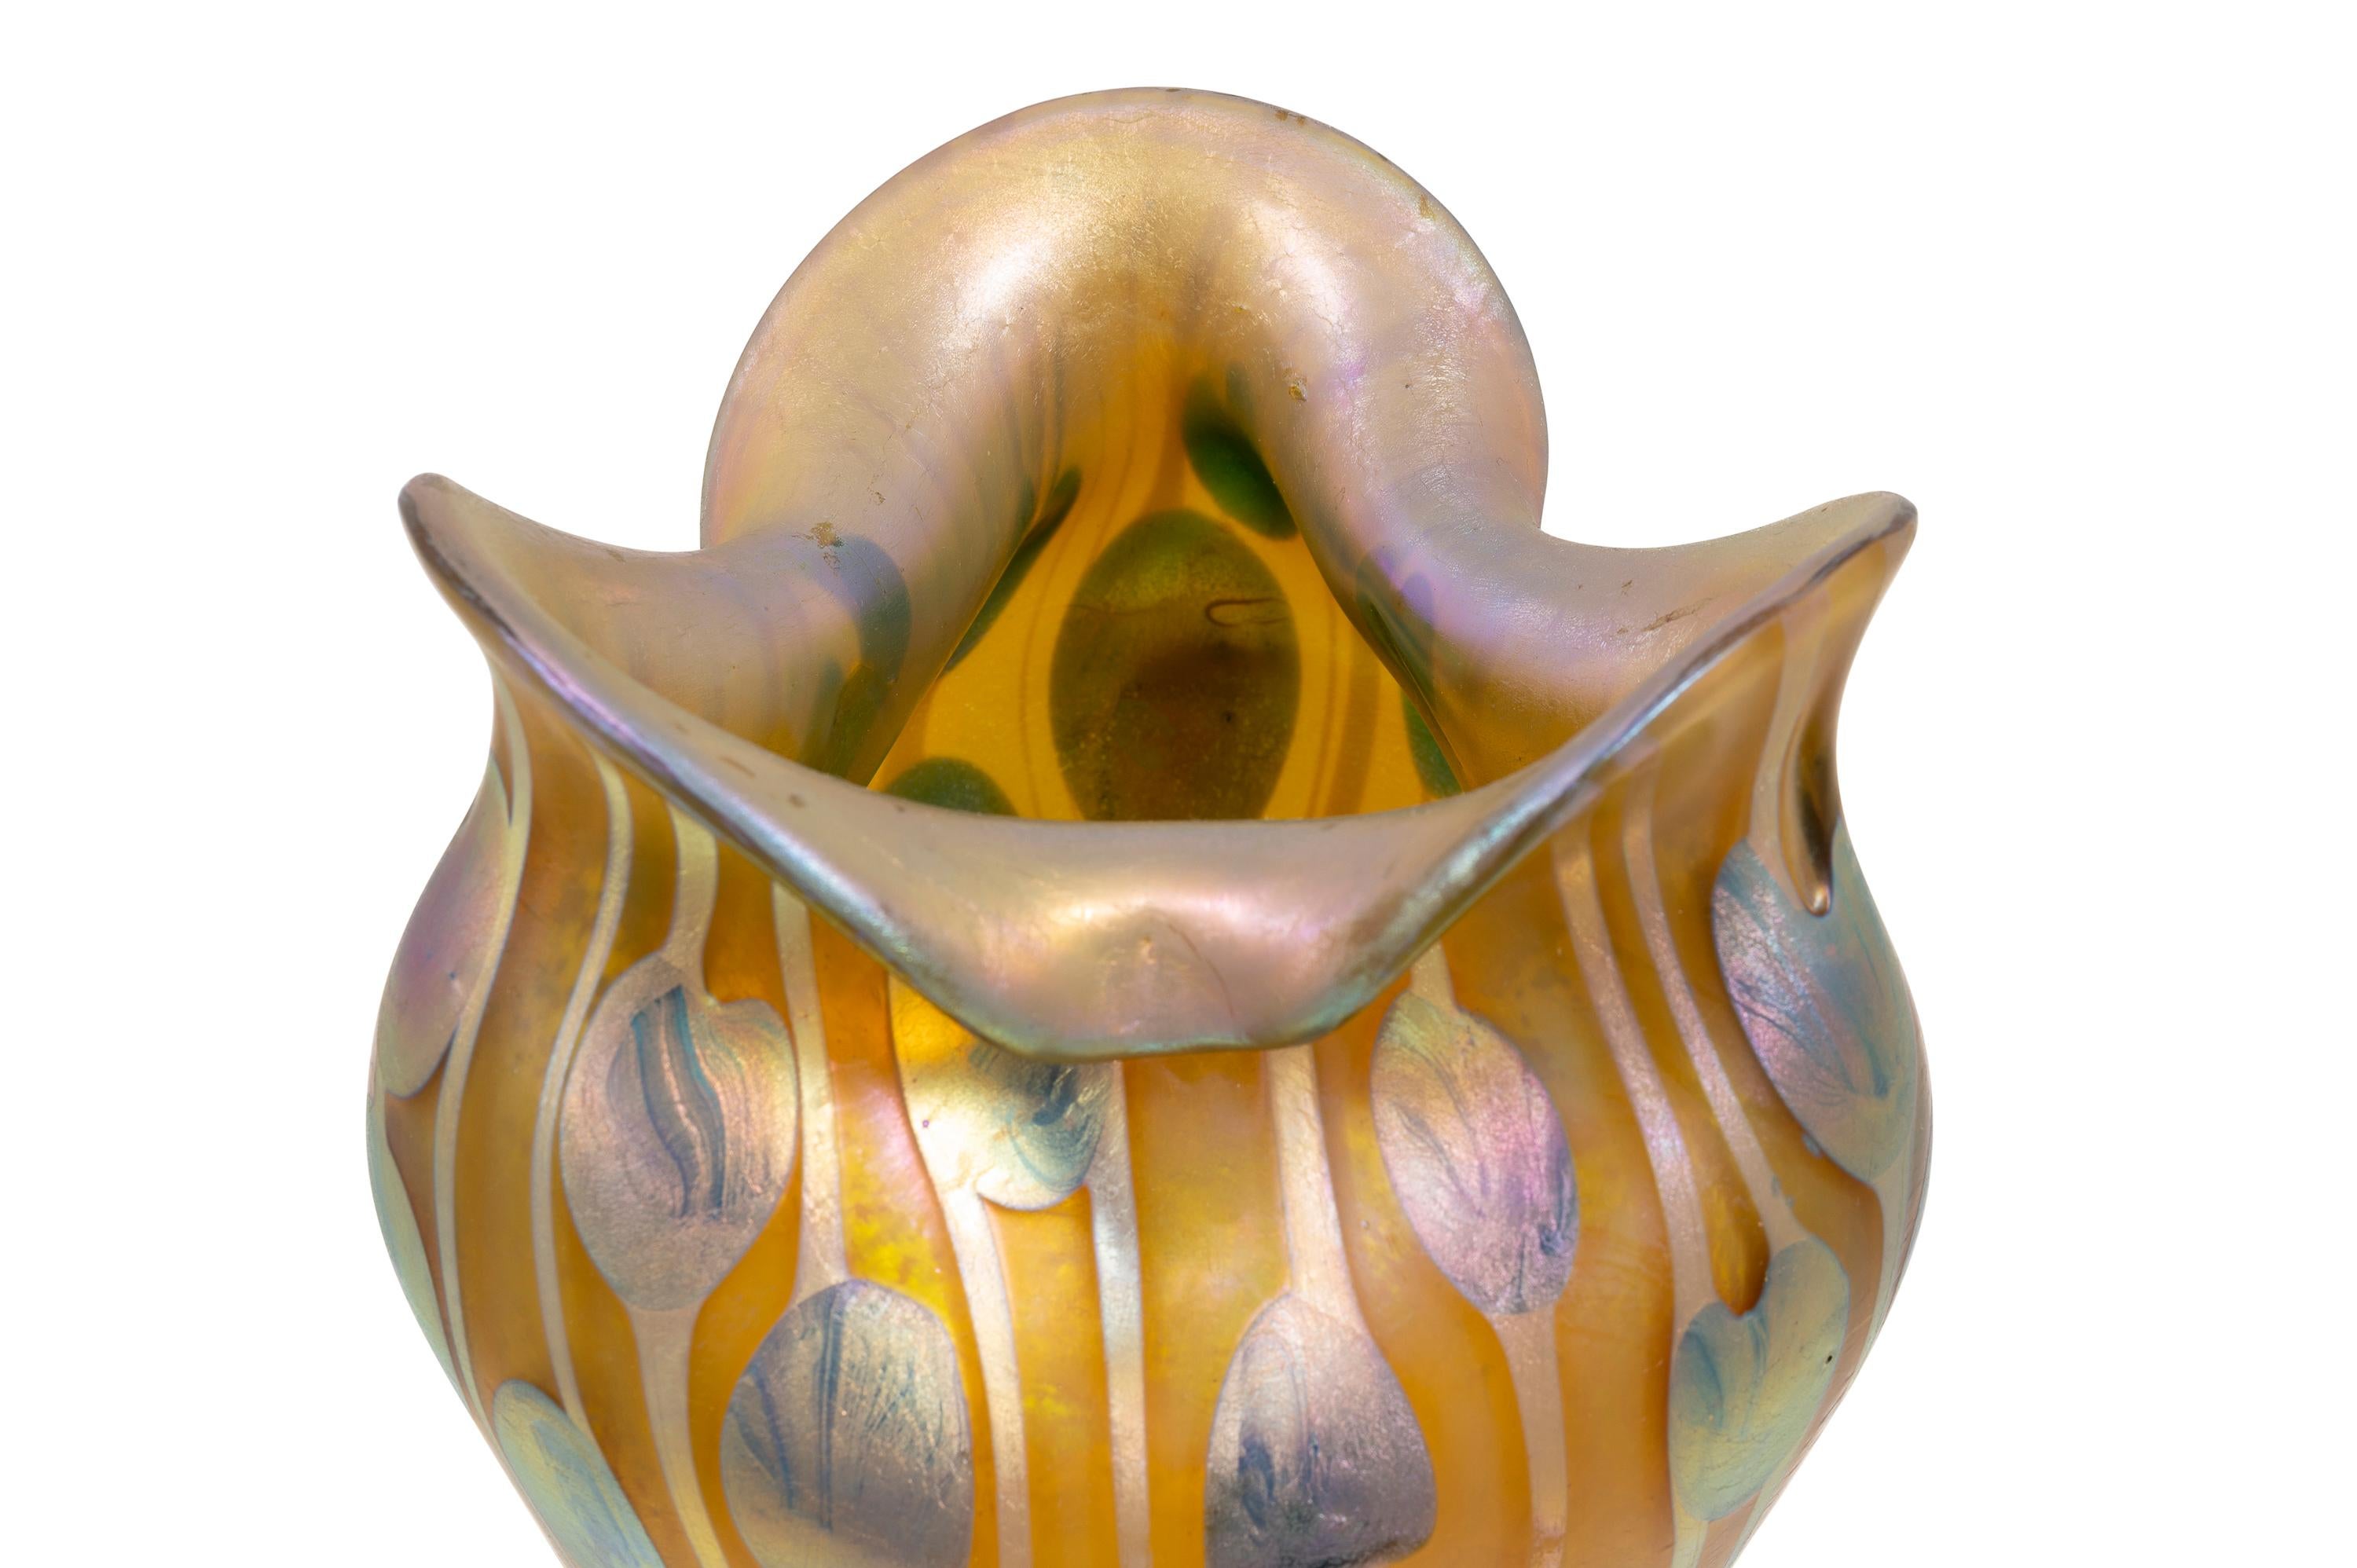 Bohemian Glass Vase Loetz circa 1901 Viennese Art Nouveau Yellow Gold Silver In Good Condition For Sale In Klosterneuburg, AT